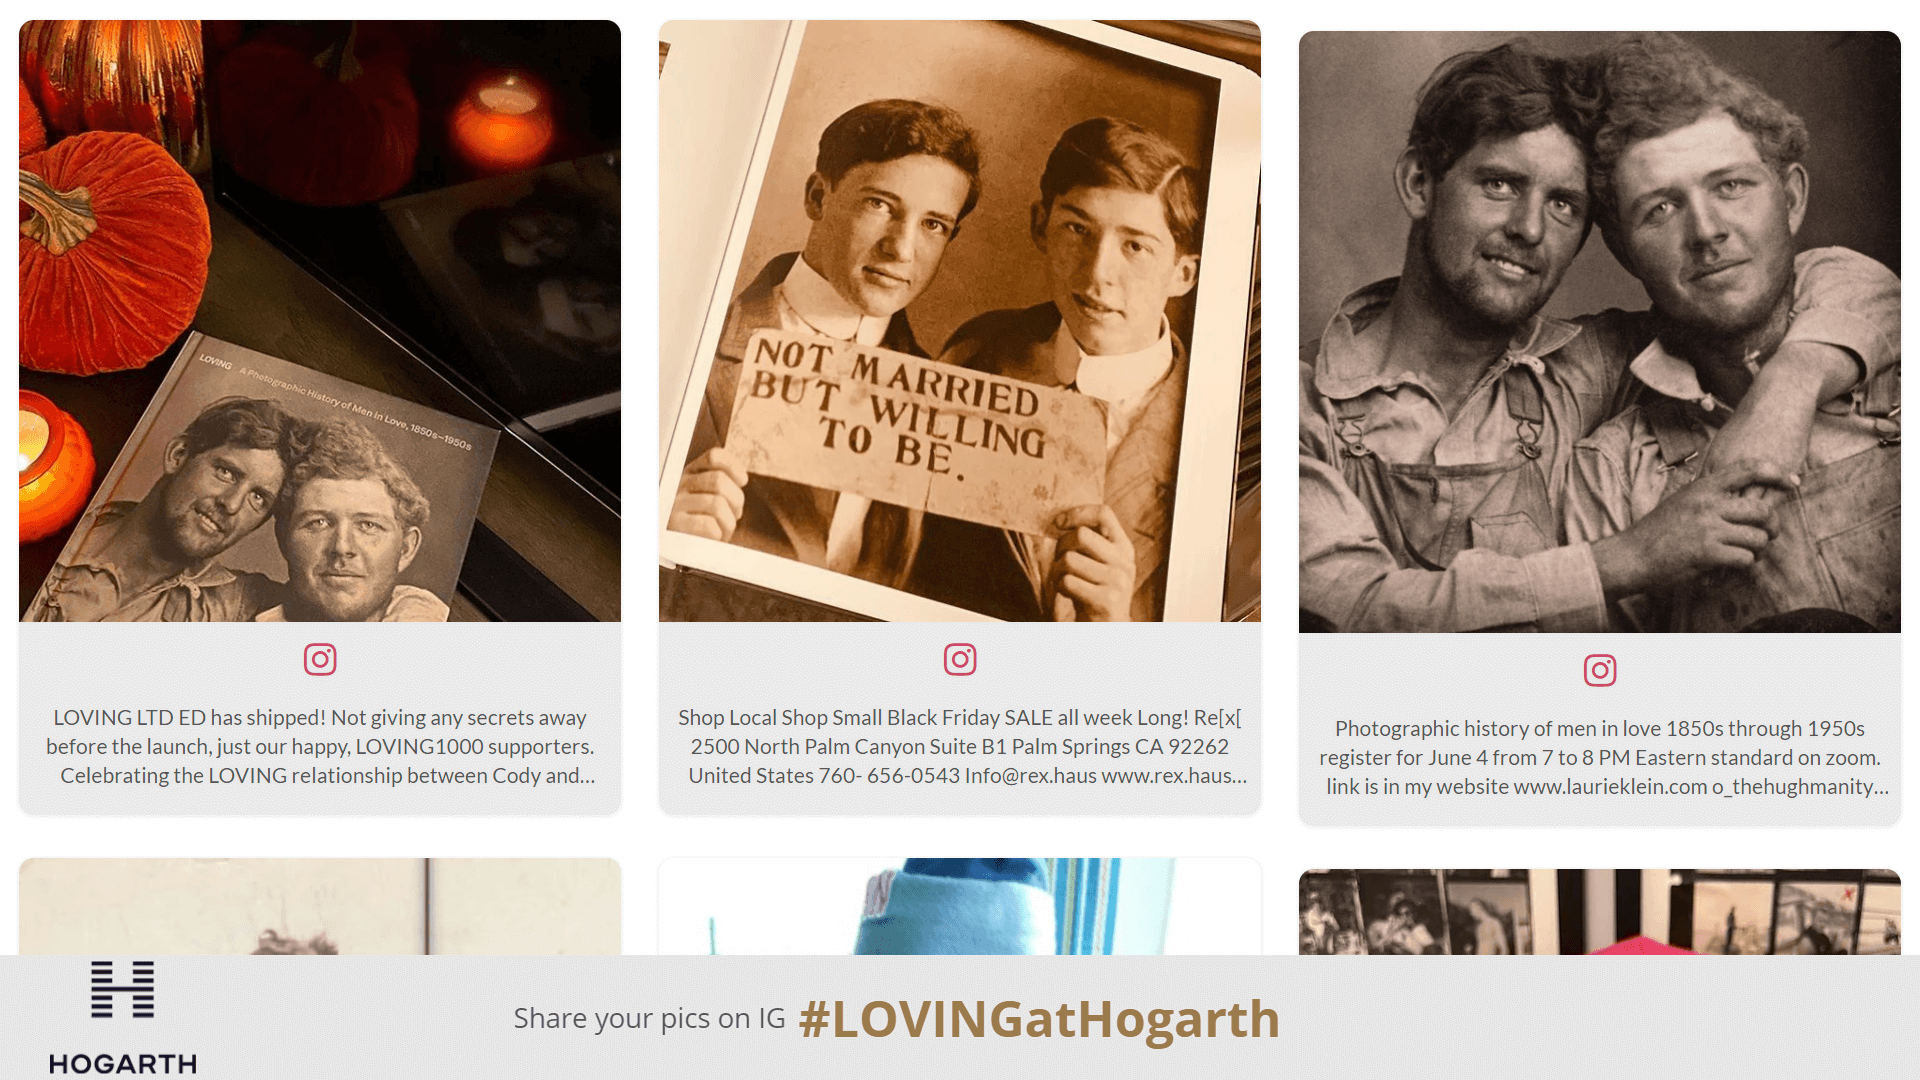 LOVING: A Photographic History of Men in Love 1850s-1950s